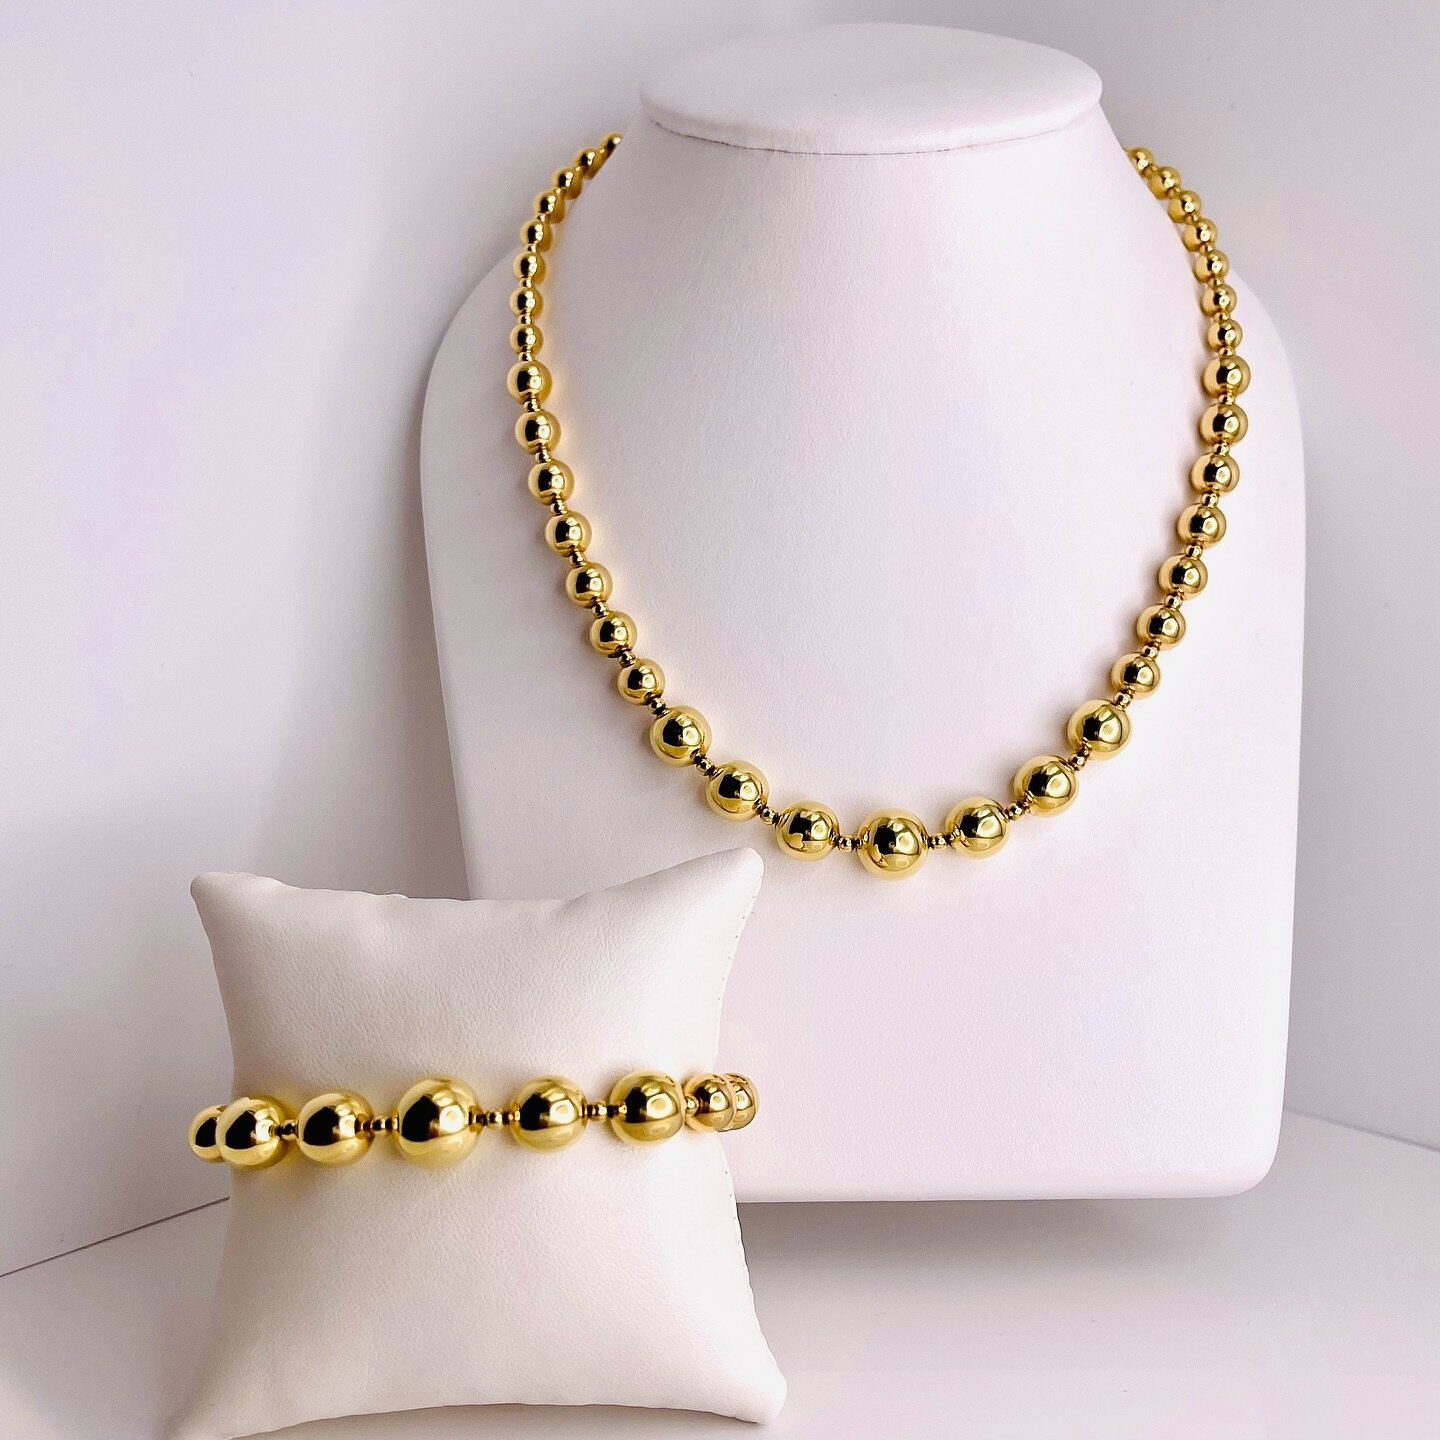 Italian 18 karat yellow gold necklace and bracelet 

Need more information?
Please message us. 

#finejewel #gold #earring #ring #necklace #everyday
#18k #18kgold #yellowgold #18kwhitegold #whitegold #jewellery #jewelry #canadianmade #italianmade #cr